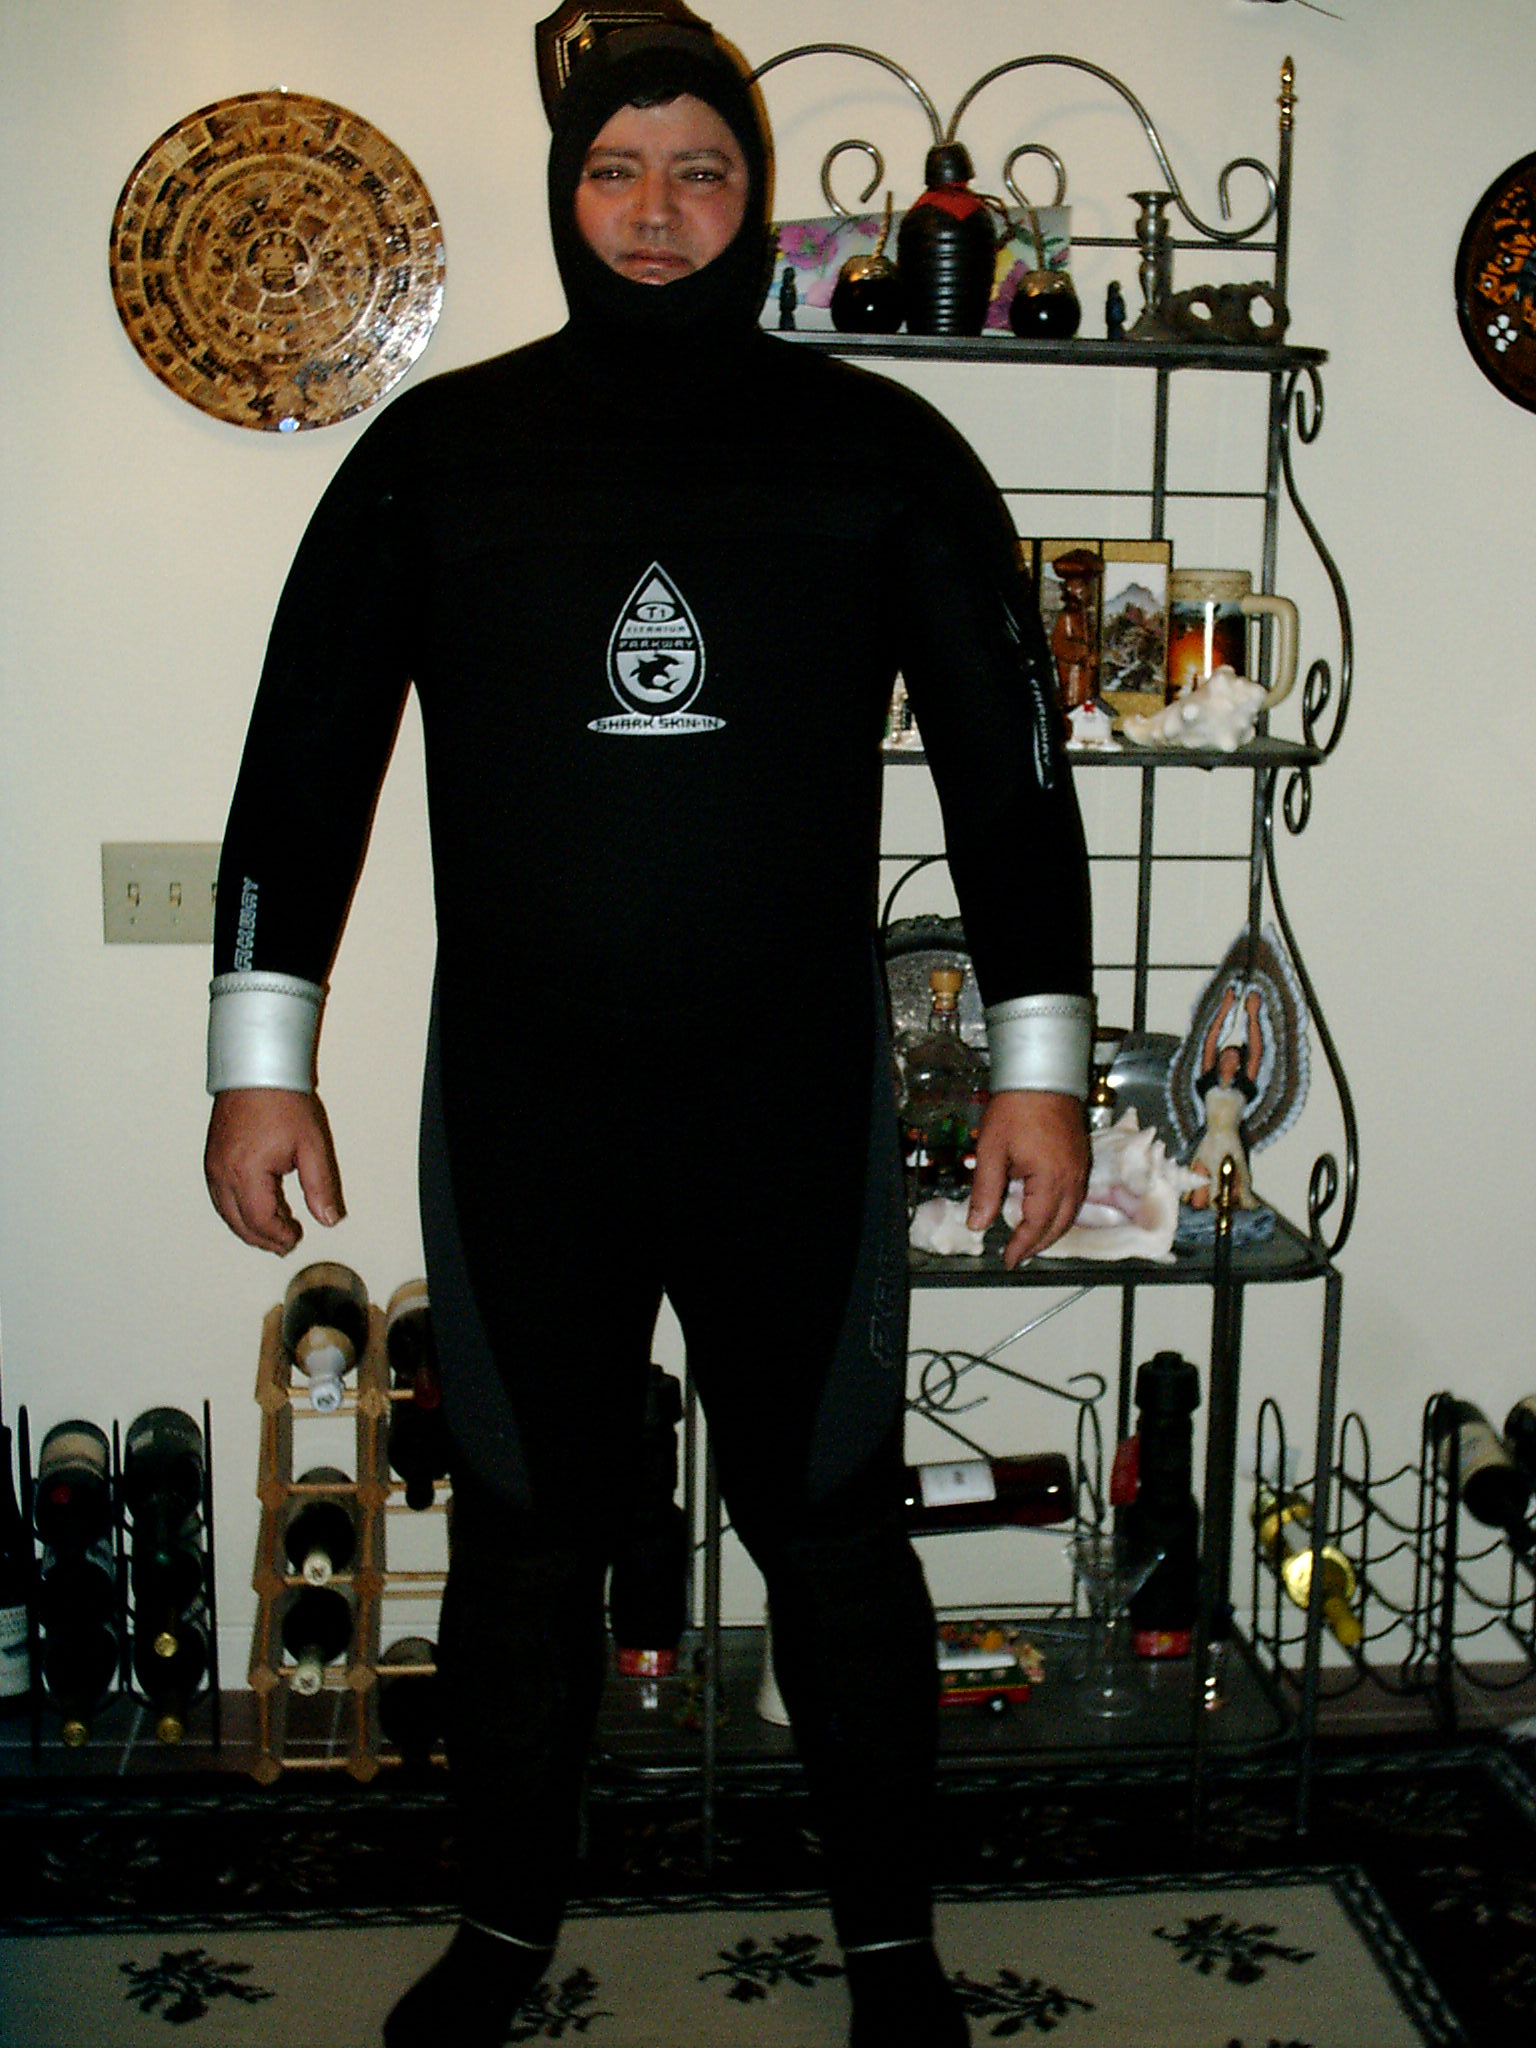 Now for a laugh - Me in a semi-dry suit